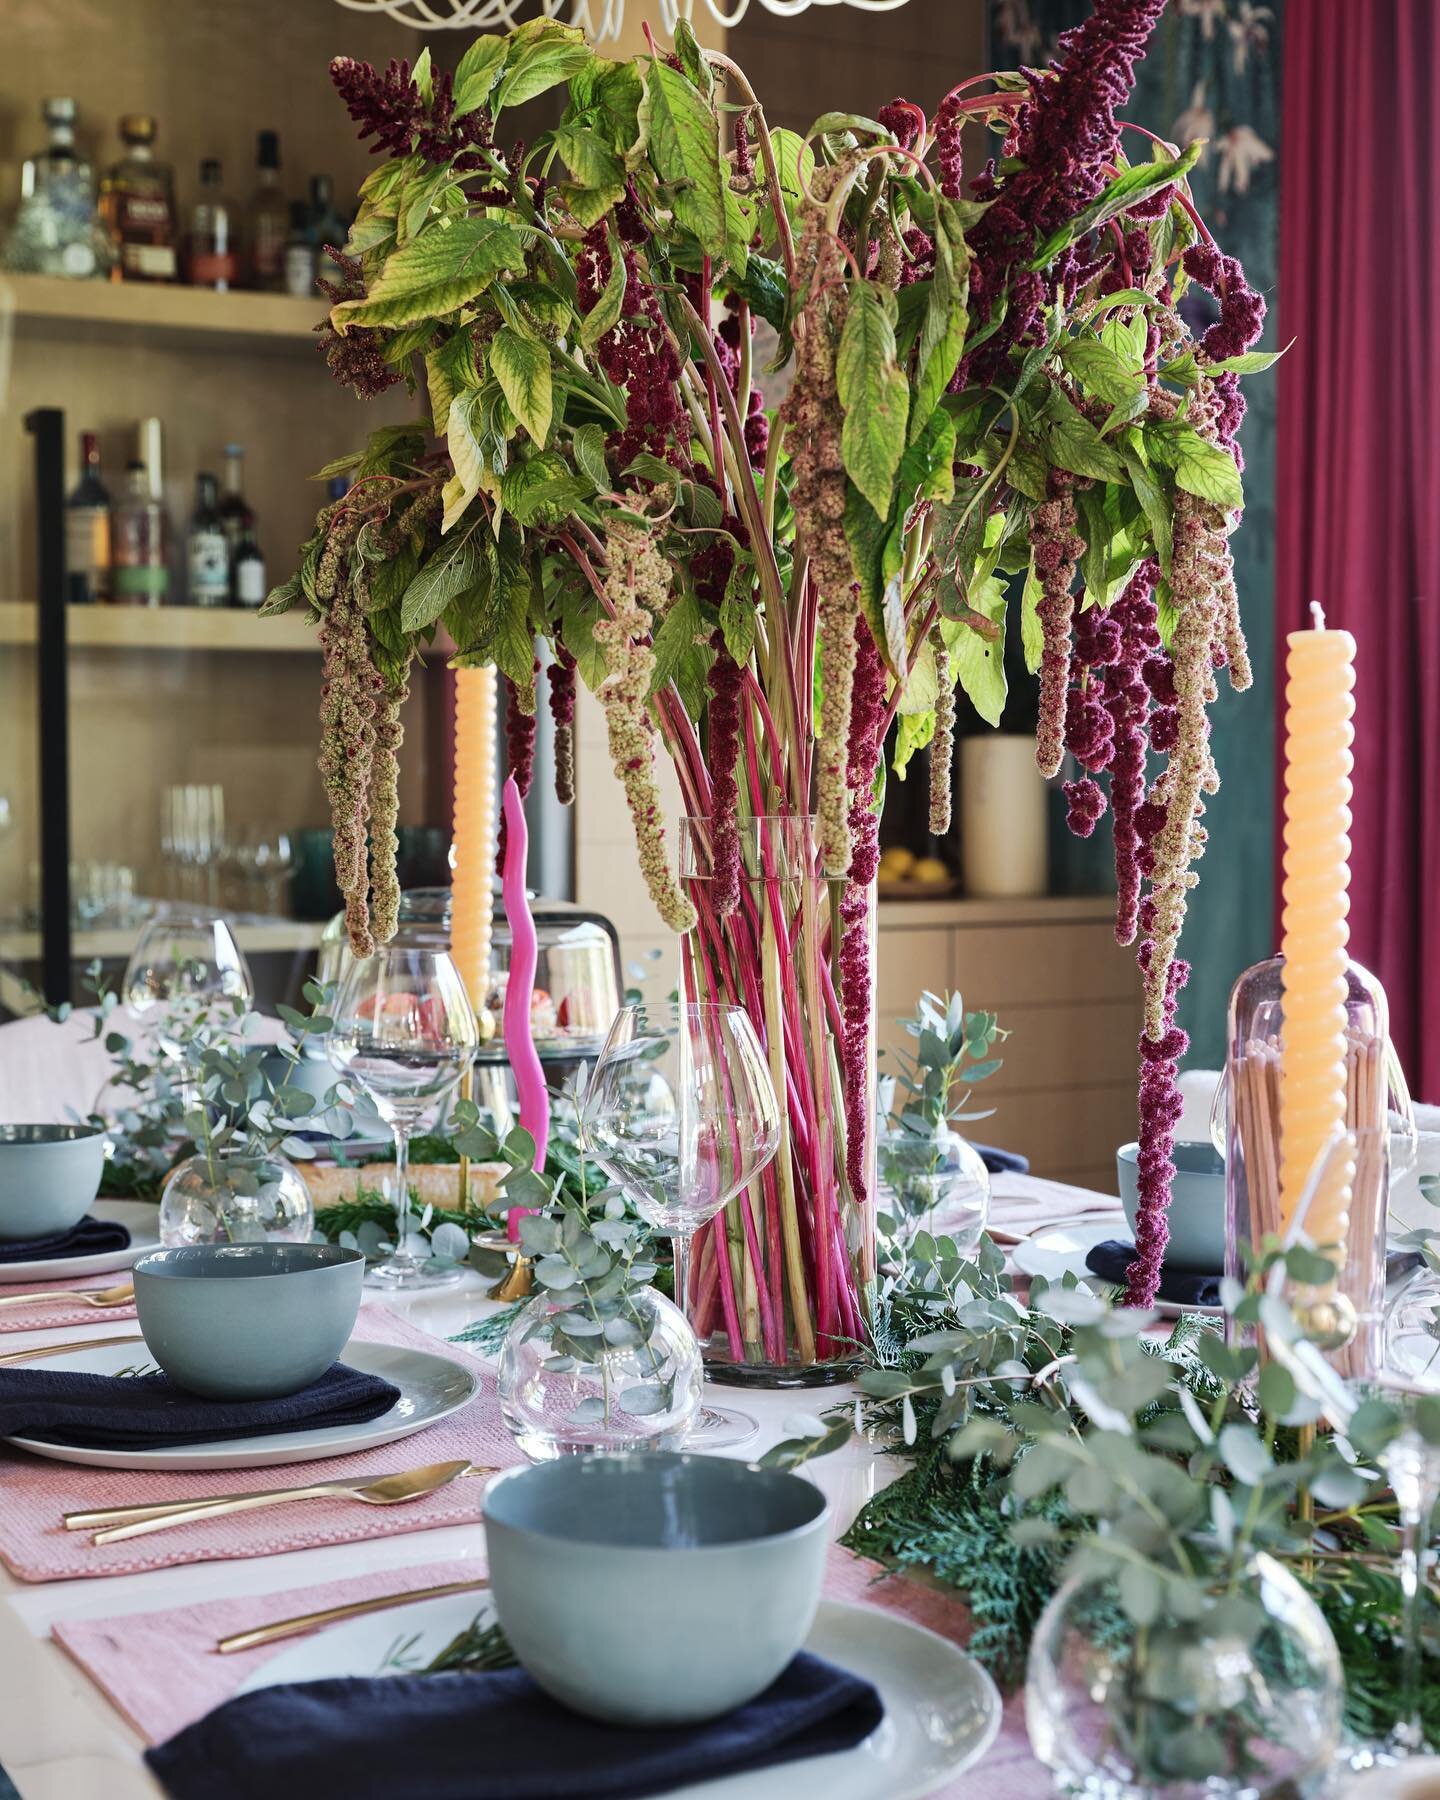 How do you plan to decorate the dining table for your holiday dinner? Tall flower arrangements so you can&rsquo;t see the person sitting across from you, or little shorty bud vases because you&rsquo;re excited to chat with everyone? Plan accordingly.